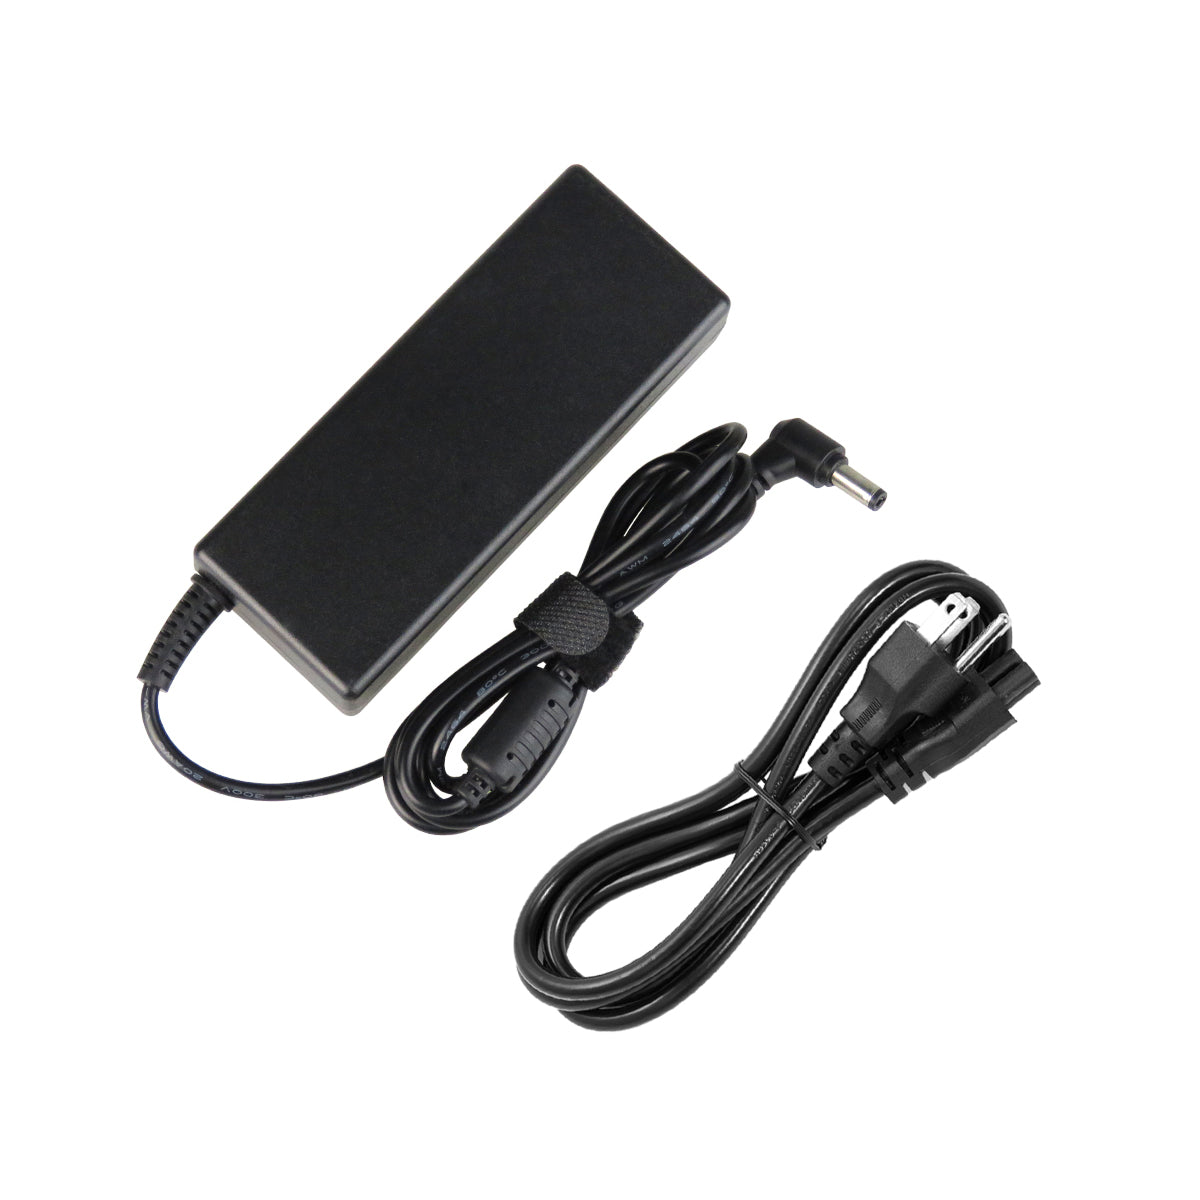 AC Adapter Charger for ASUS N73 Notebook.